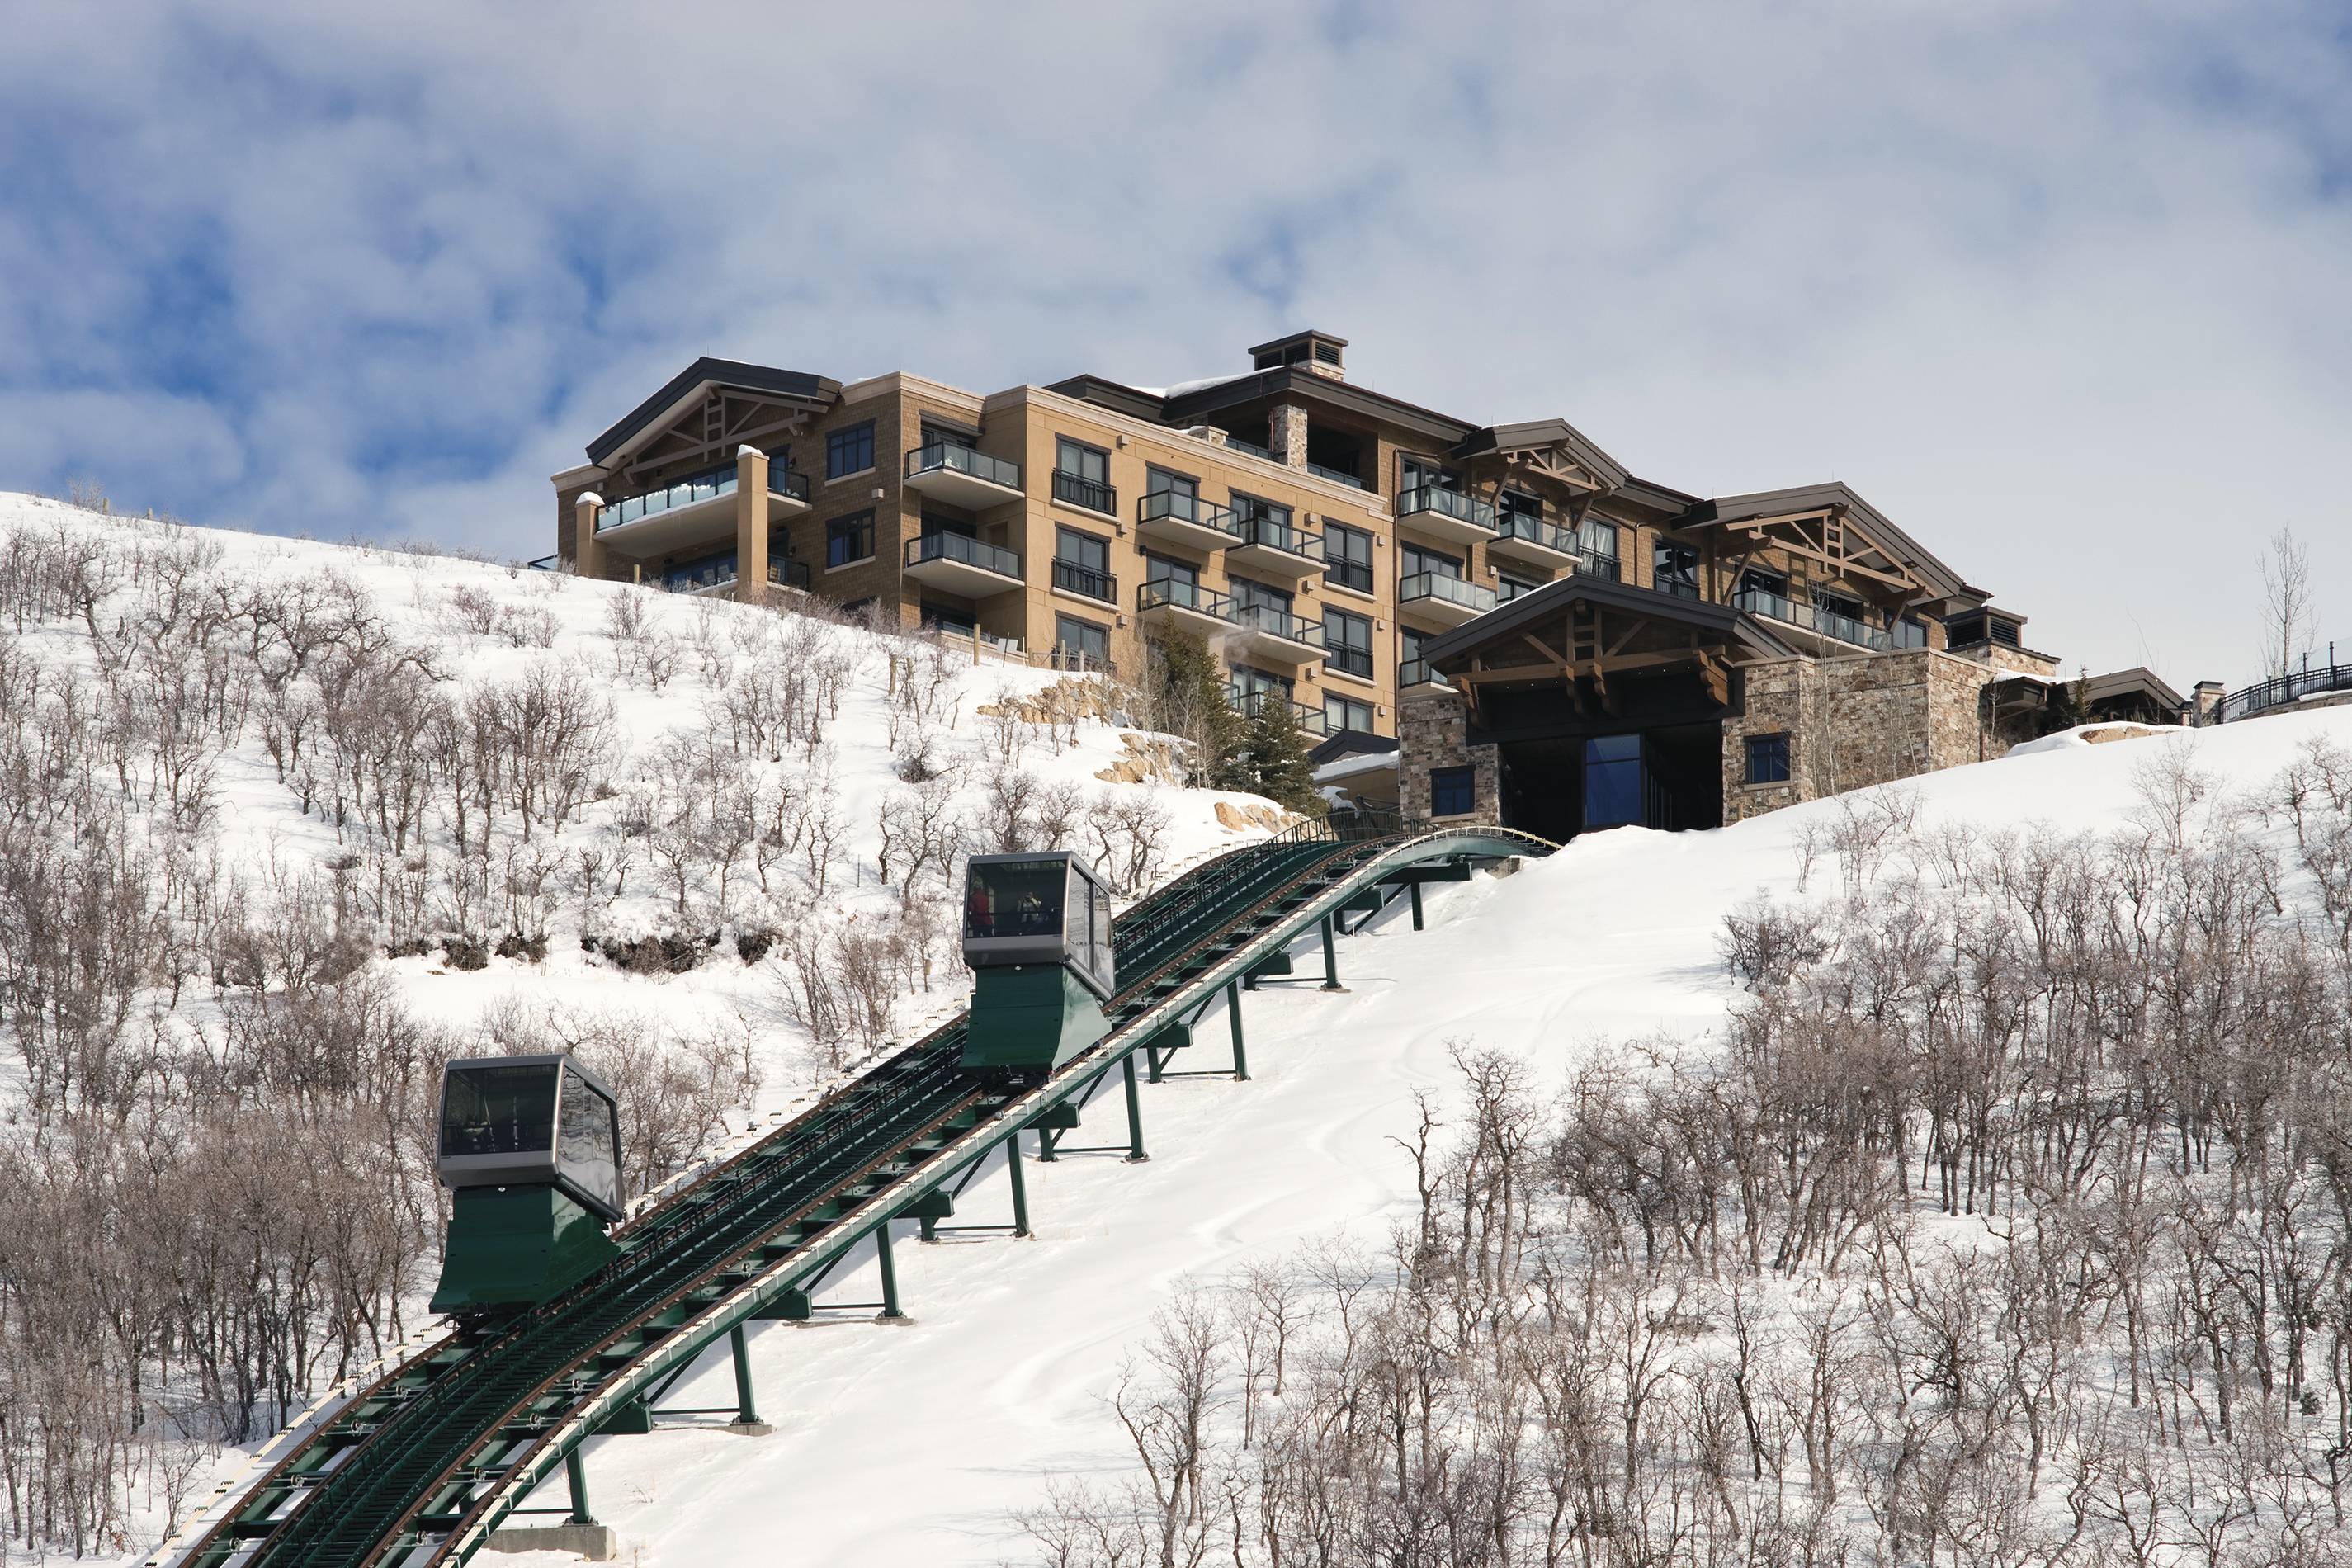 The funicular at the St. Regis Deer Valley